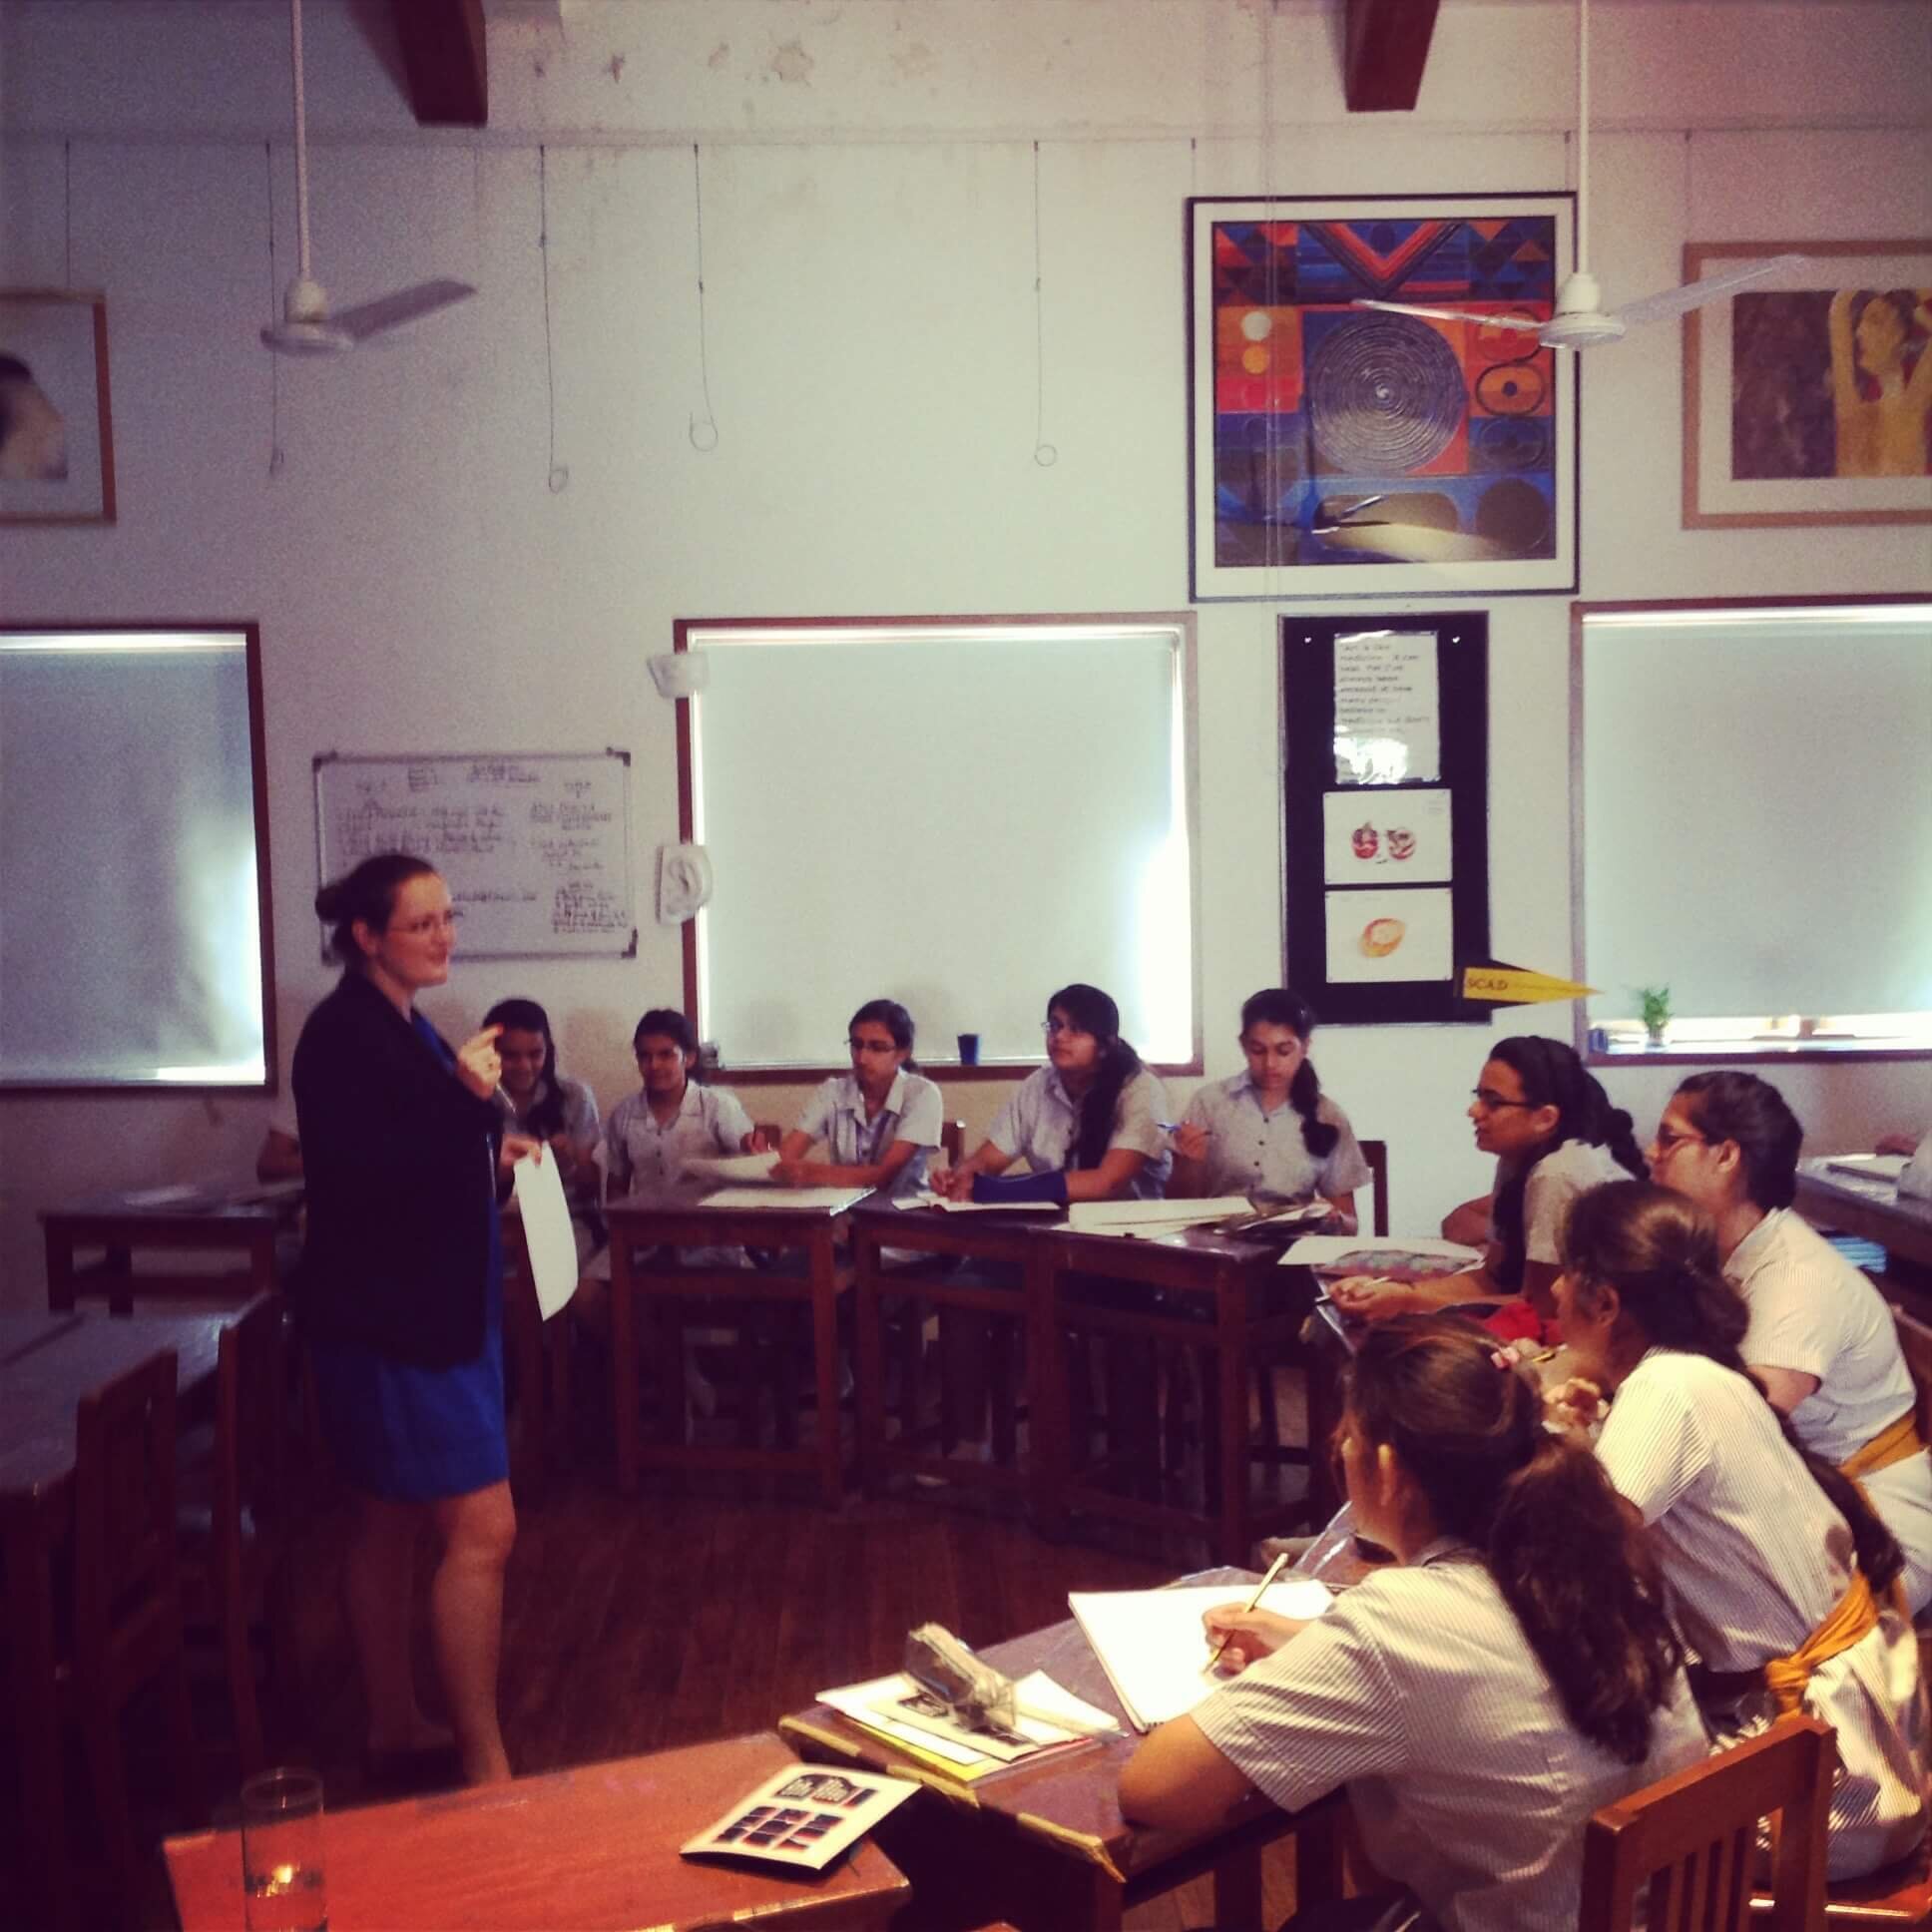 British female architect leads design class at all girls school in India